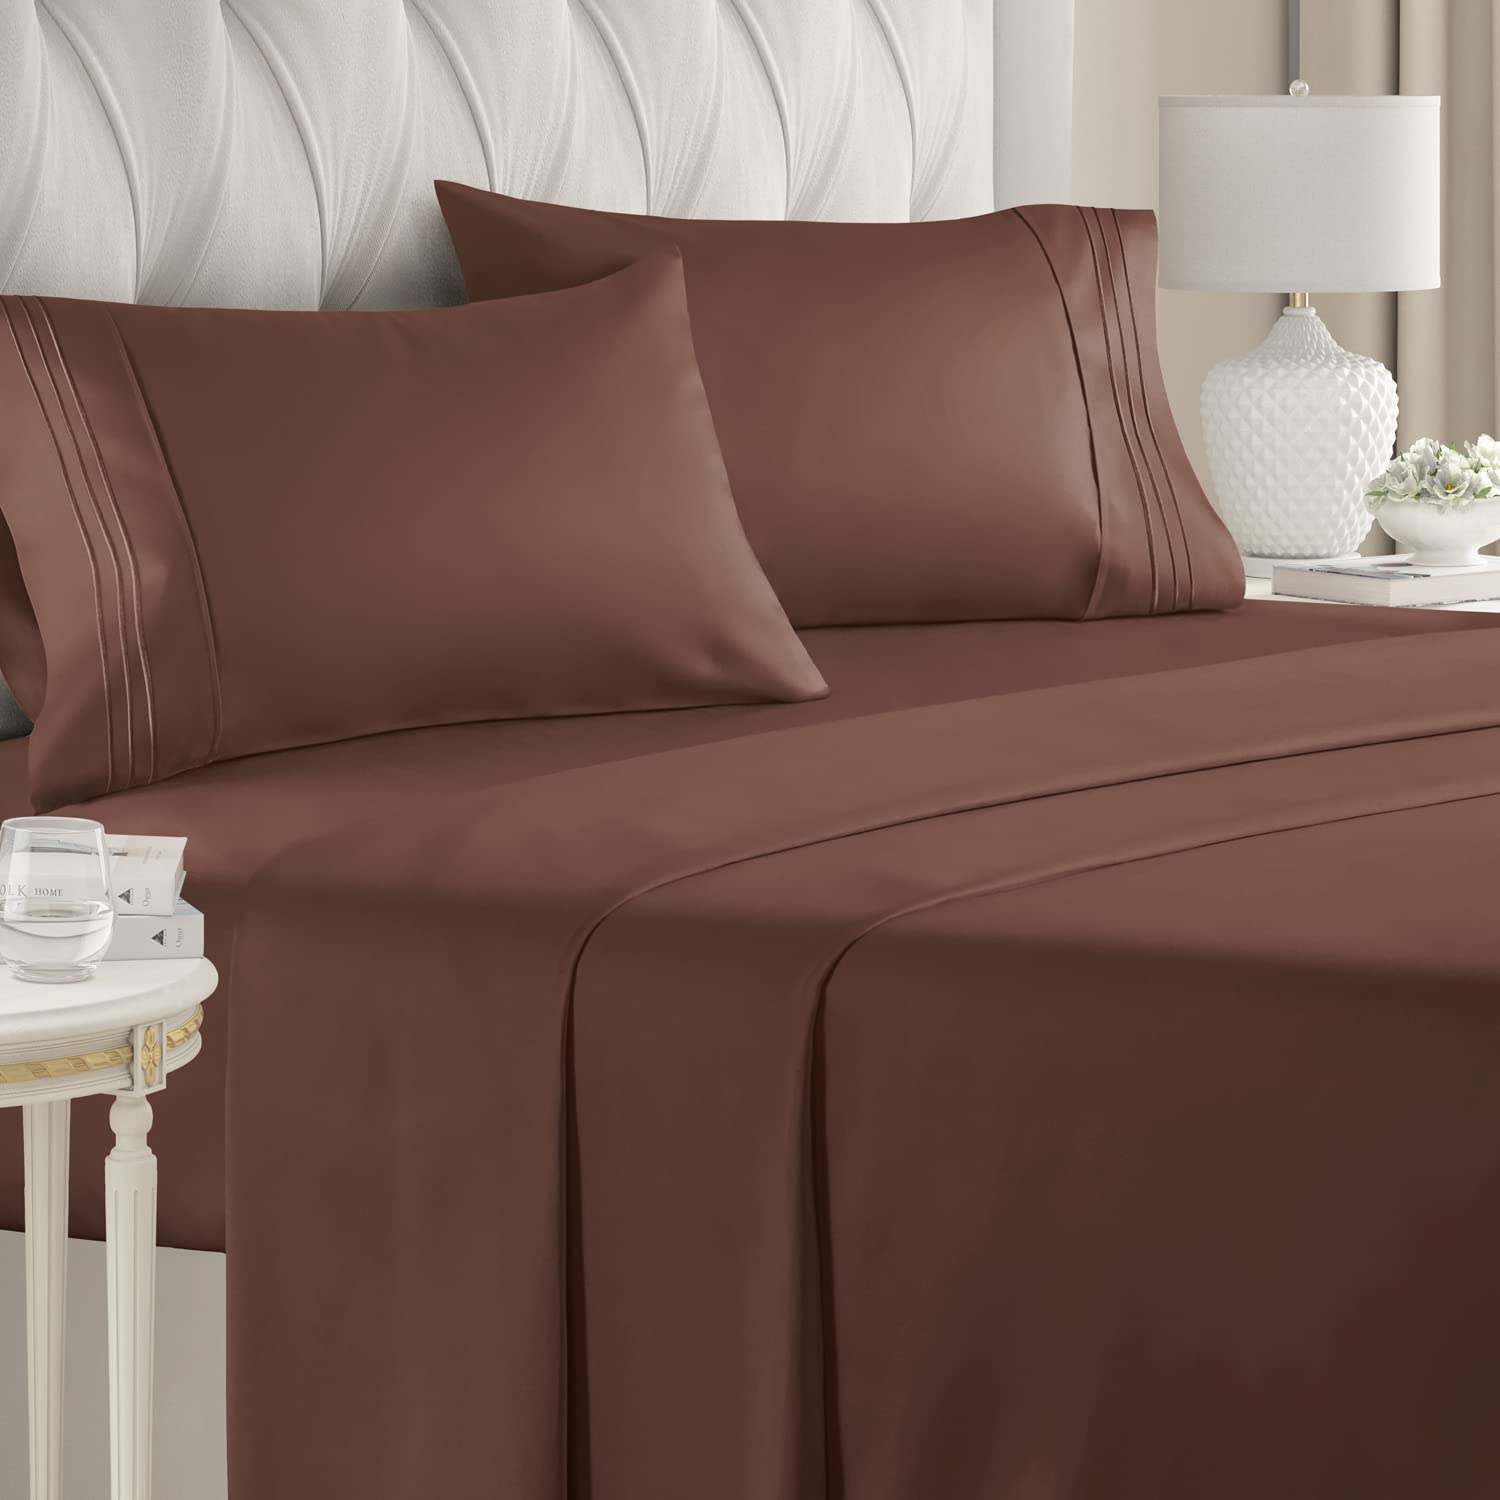 Buy Sheet Set Solid Chocolate Egyptian Cotton 1000 Thread Count at- Egyptianhomelinens.com